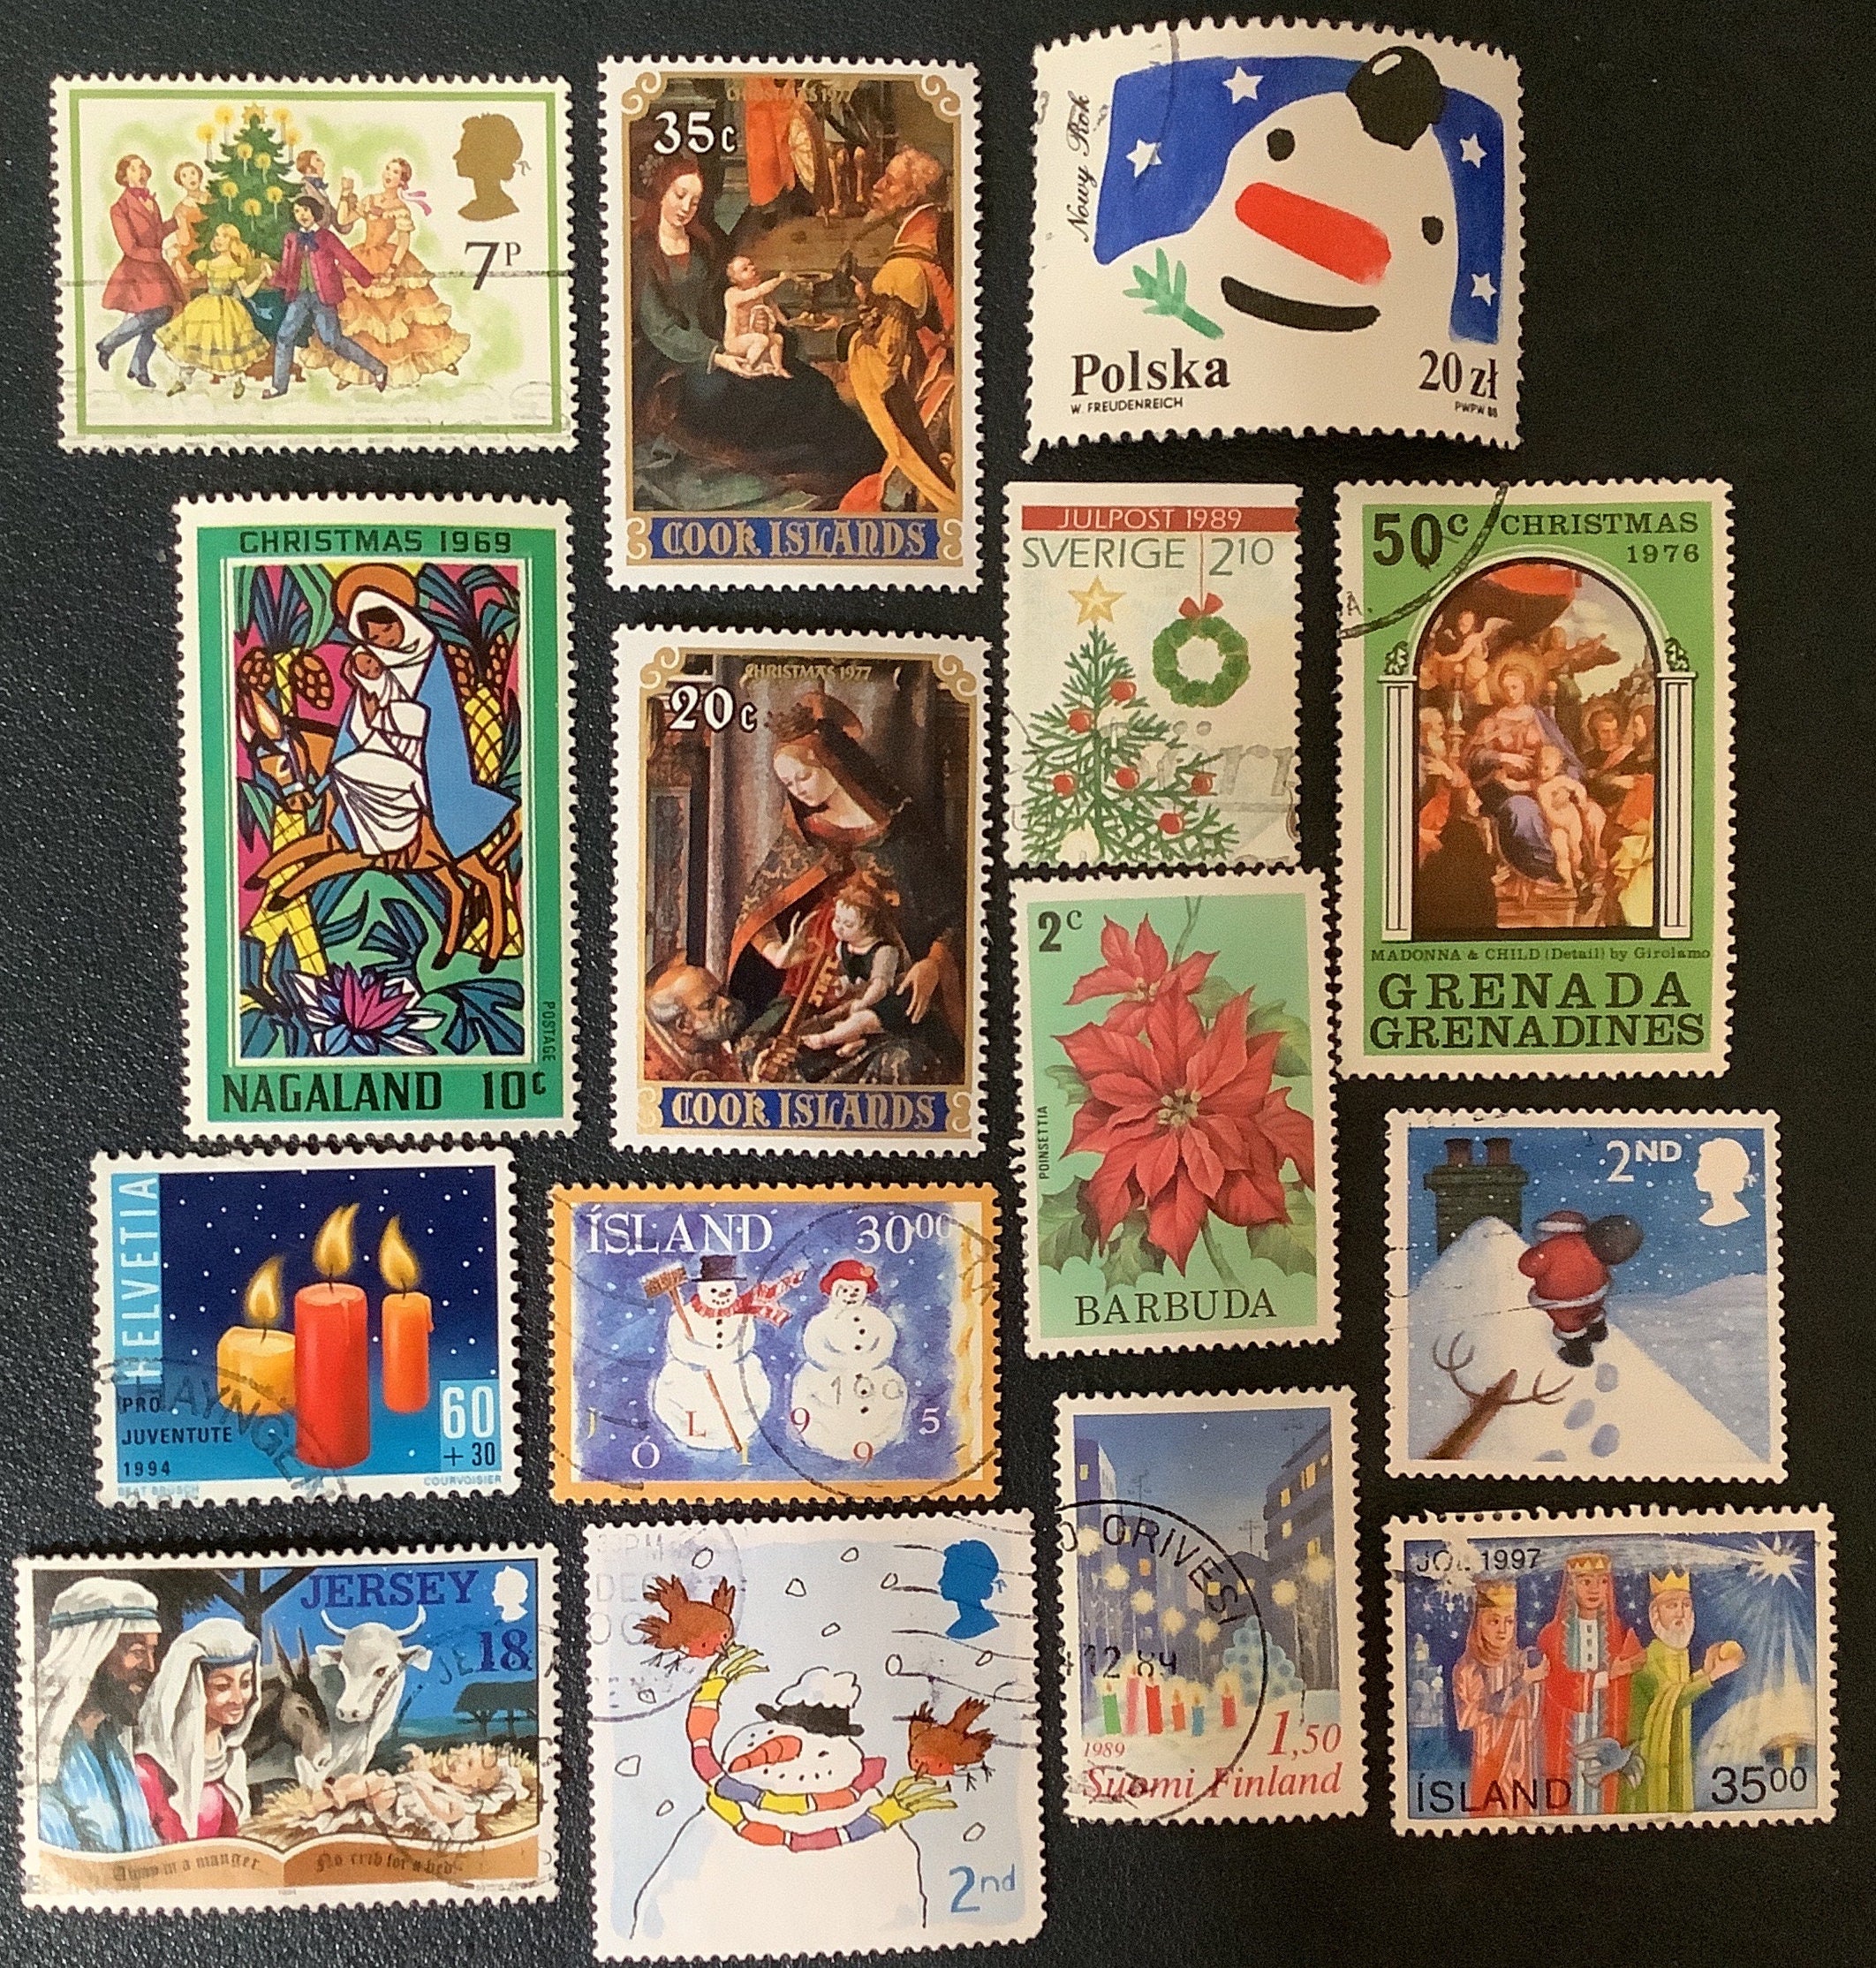 SALE 50 US United States Used Cancelled Postage Stamps Crafts